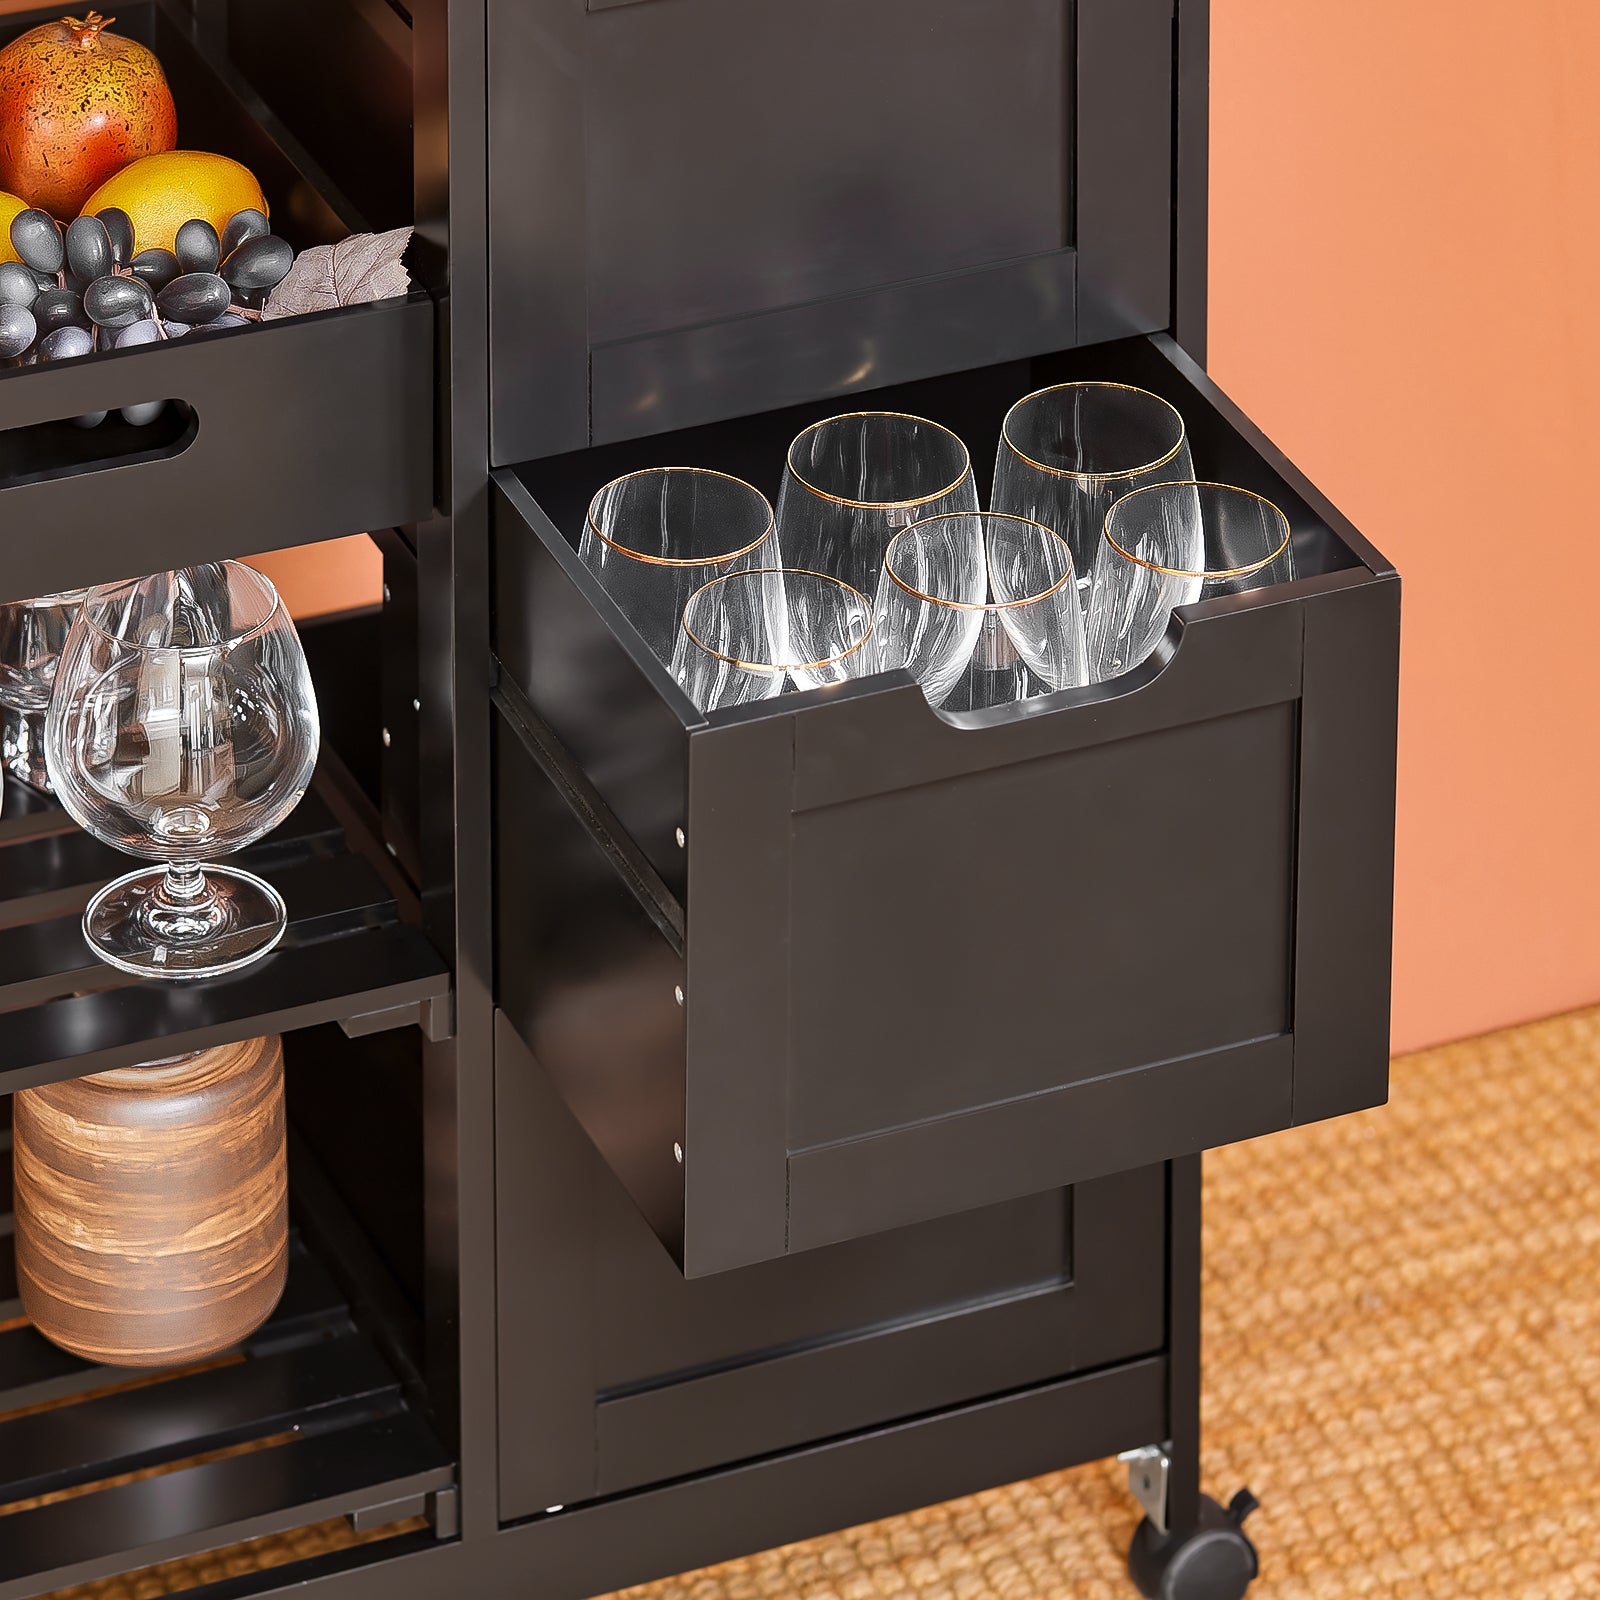 SoBuy FKW79-SCH,Kitchen Serving Cart with 3 Drawers and Removable Tray,Kitchen Storage Trolley,Black